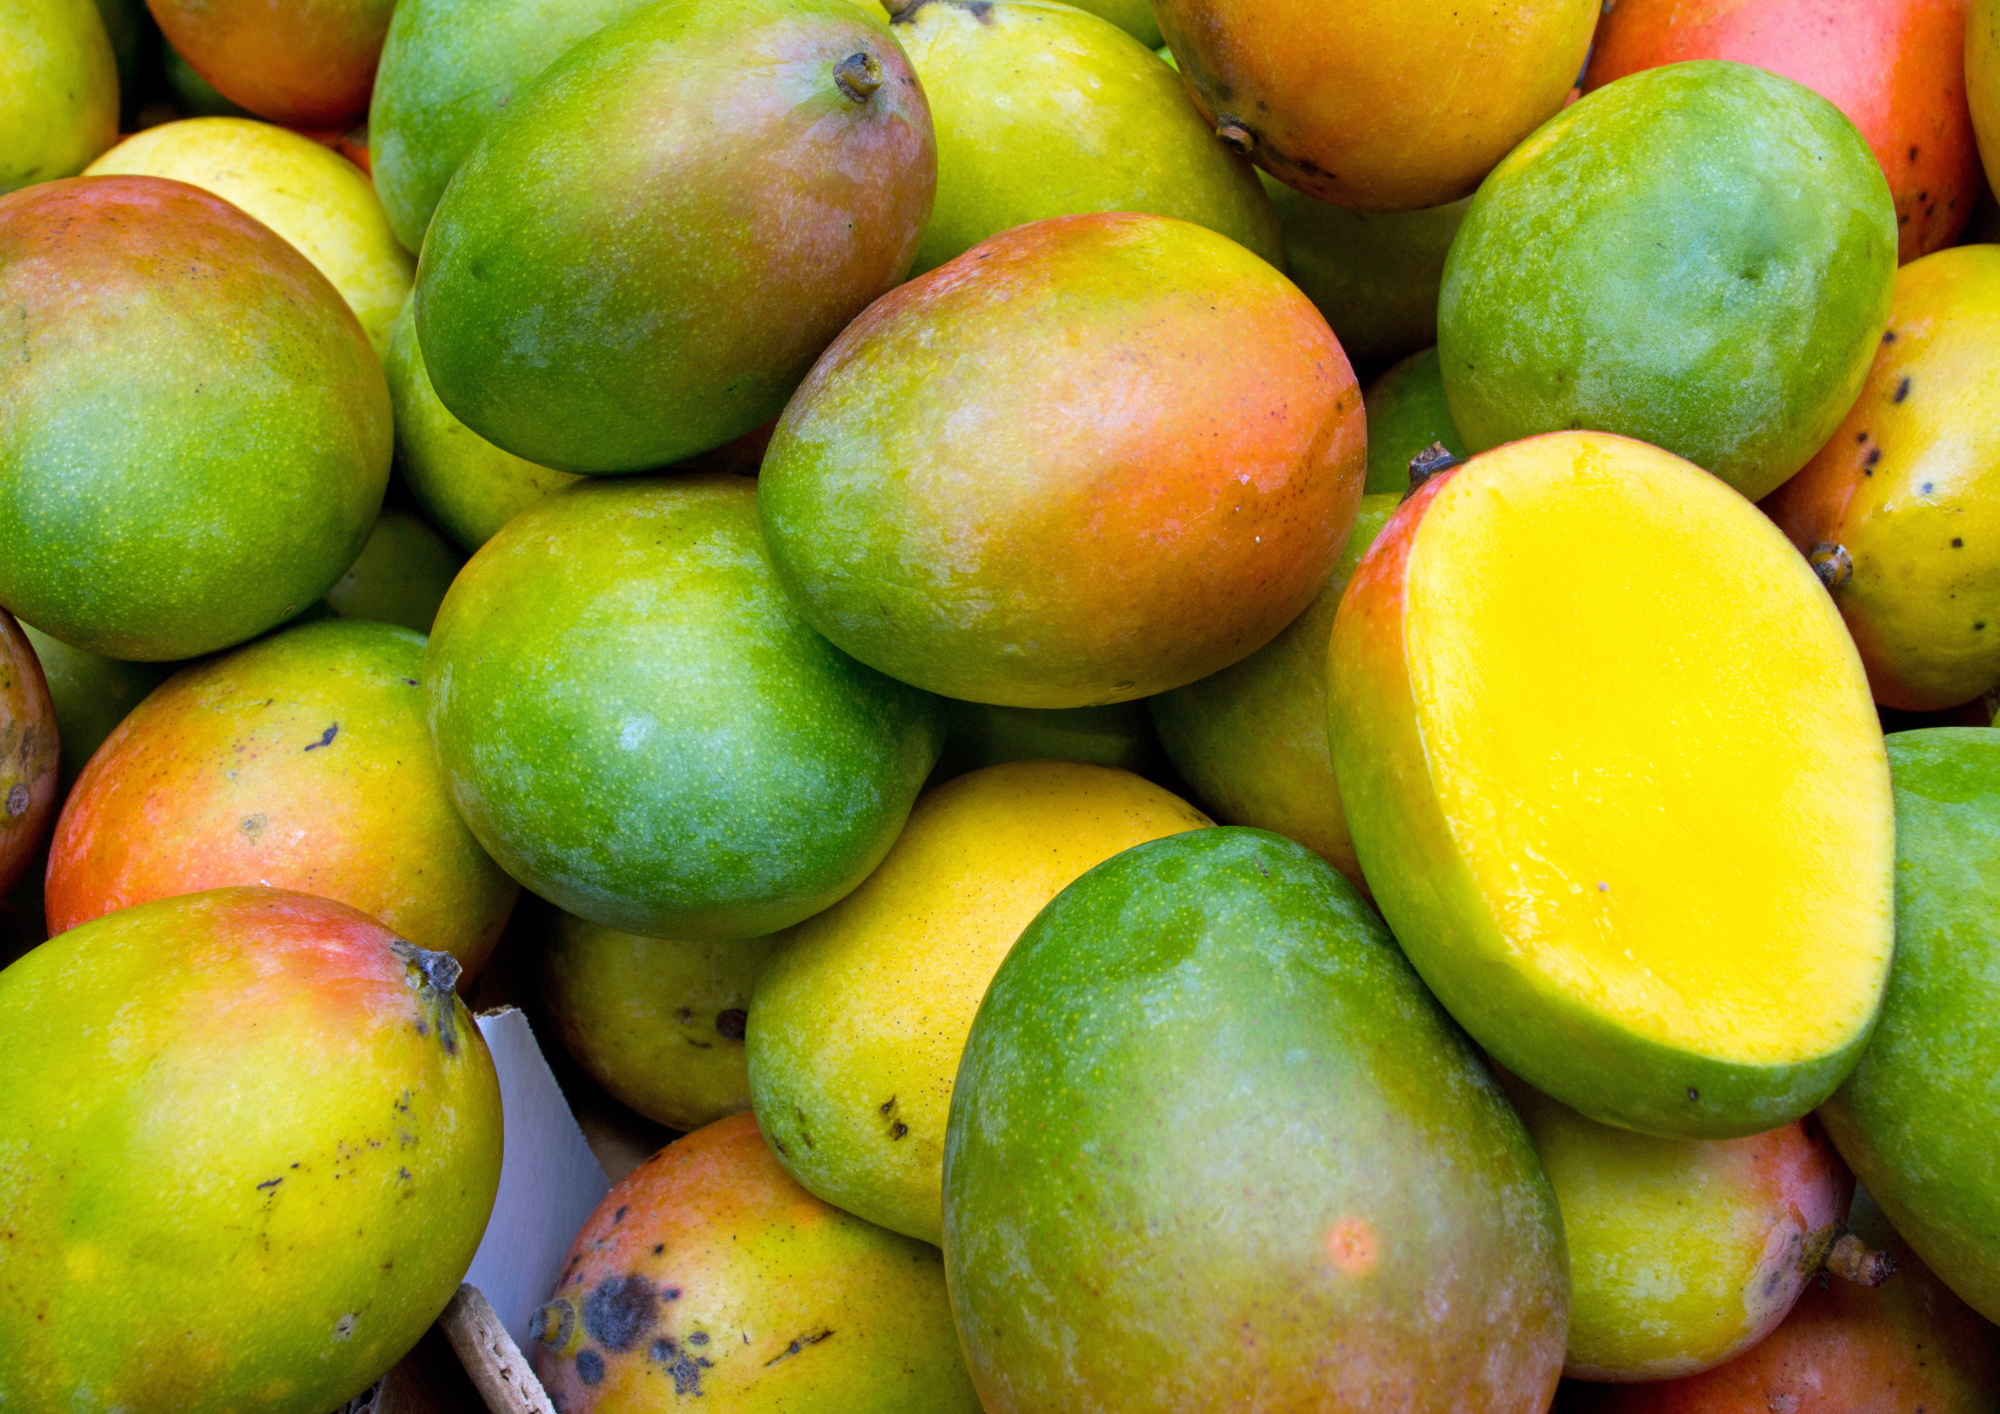 Pile of yellow and green mangoes